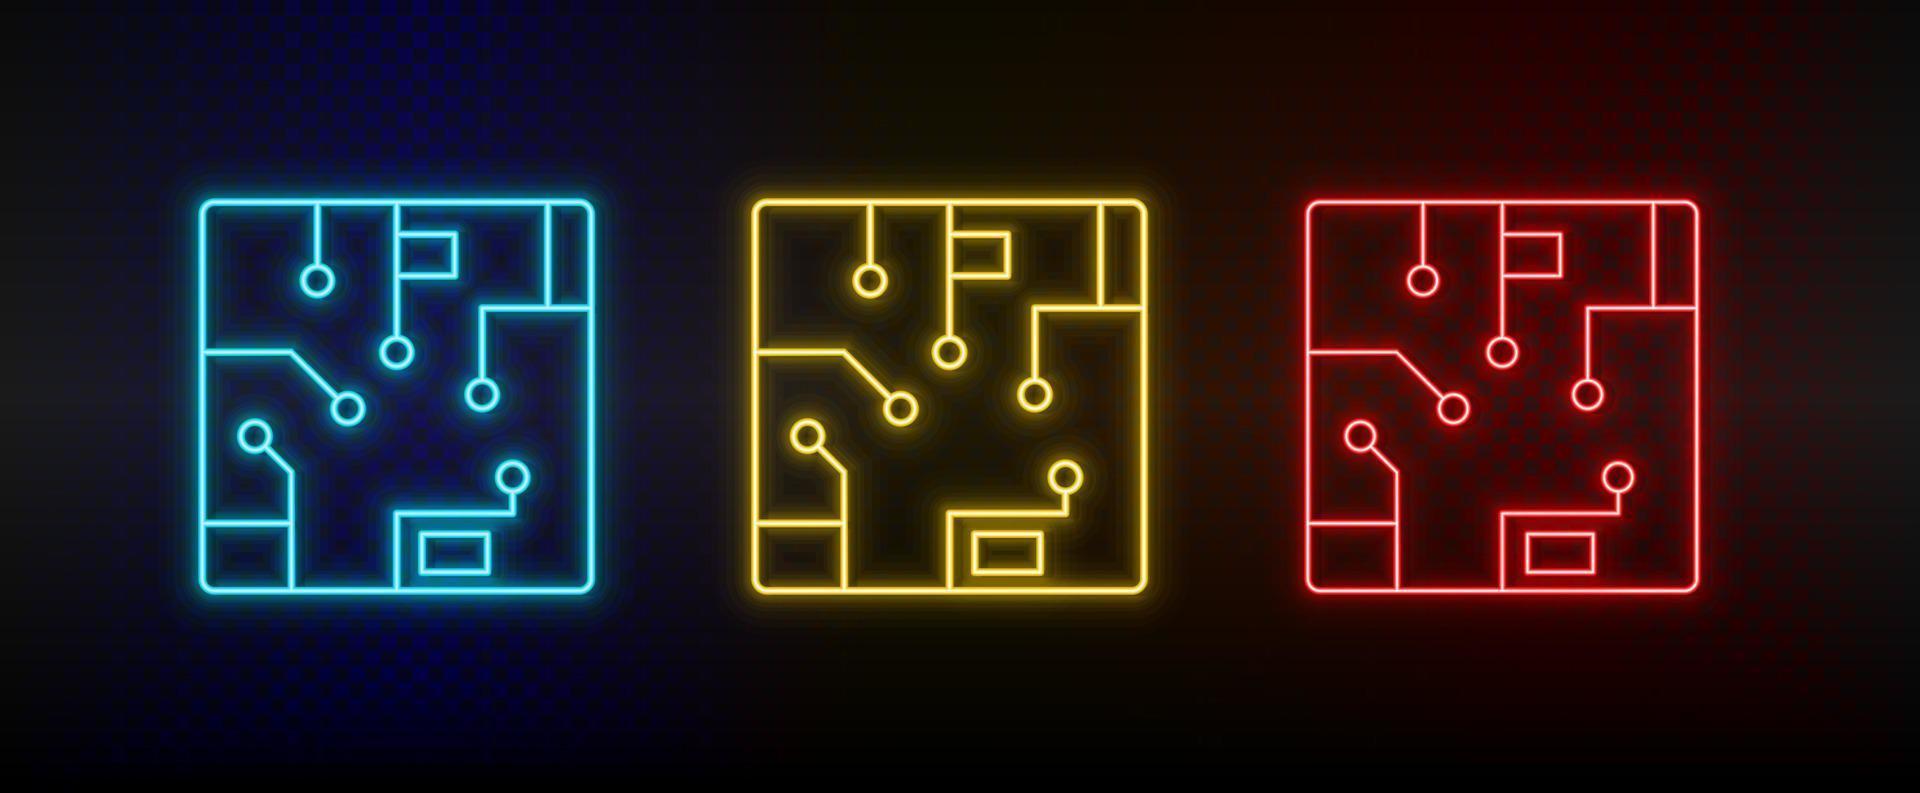 Neon icons. chip computer. Set of red, blue, yellow neon vector icon on darken background